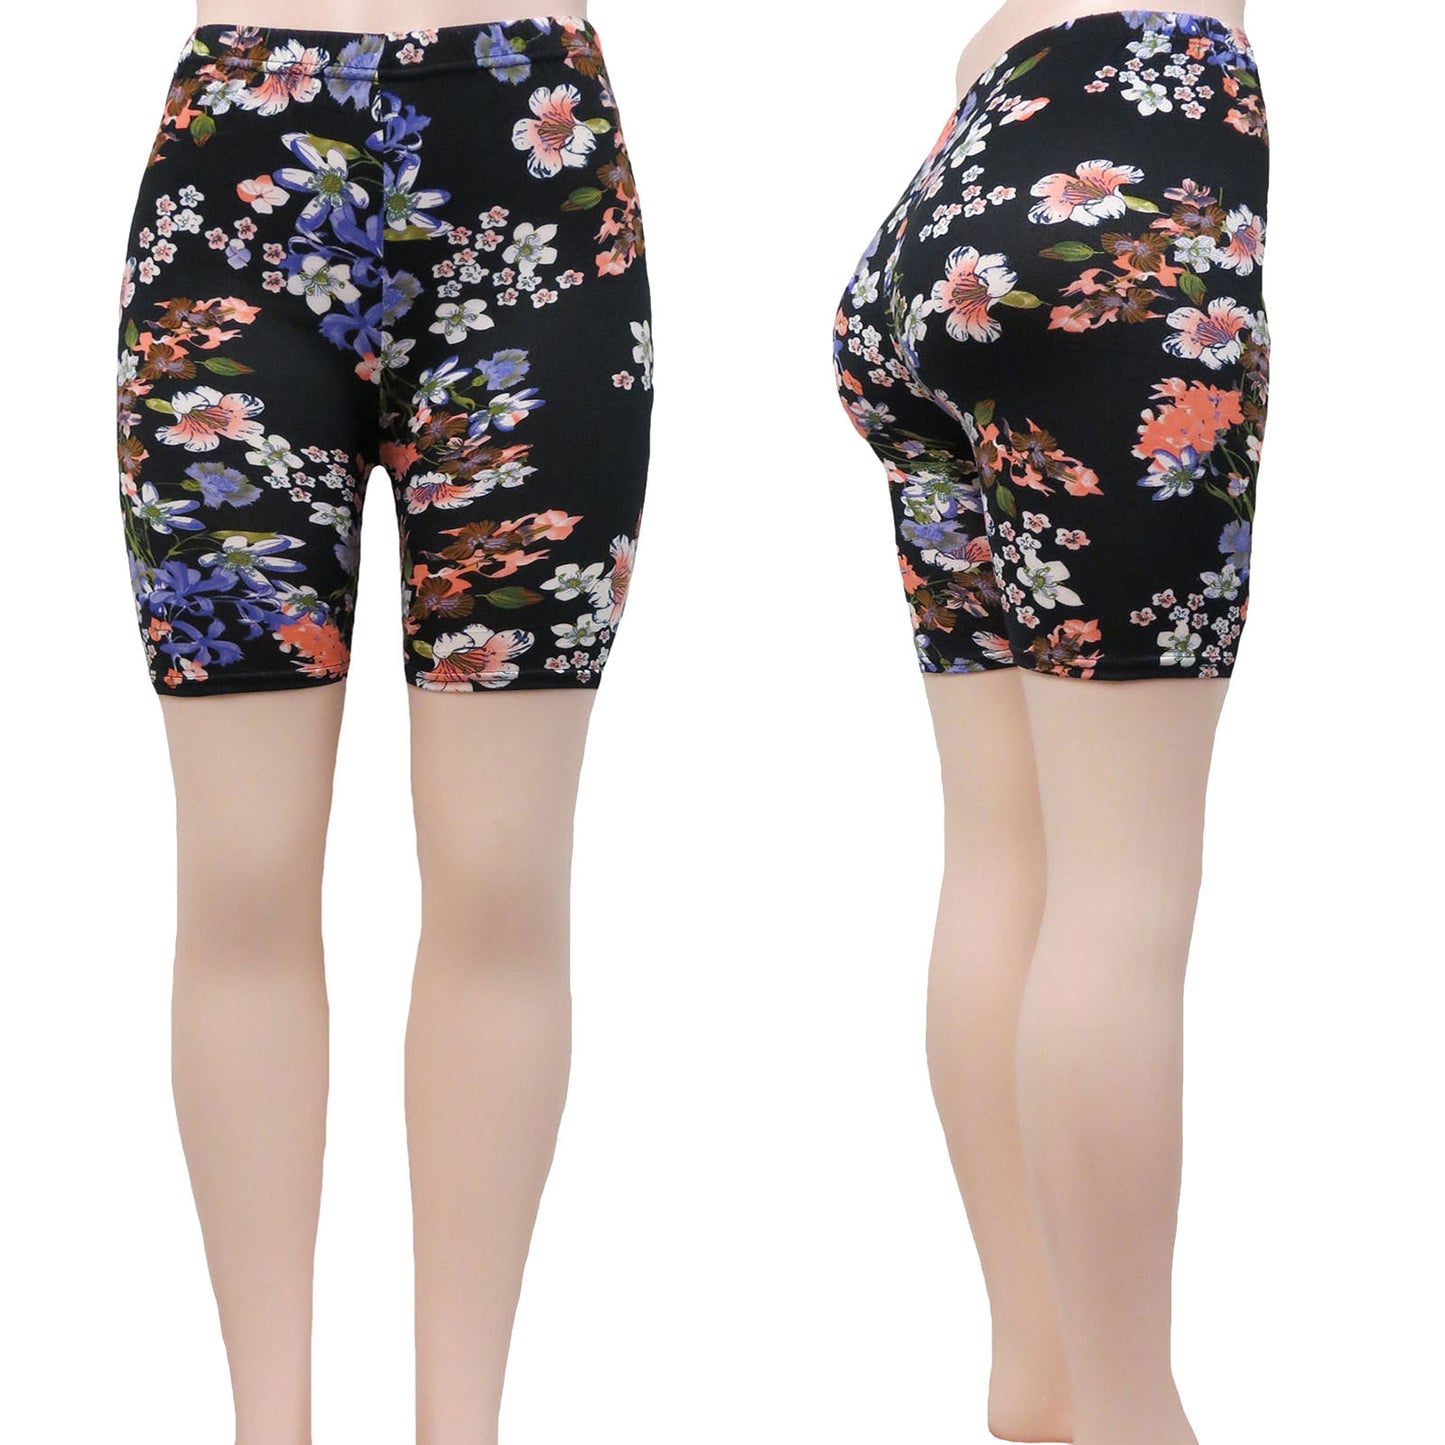 Wholesale Bike Shorts for Women in Black with a Floral Design - Alessa Rochelle